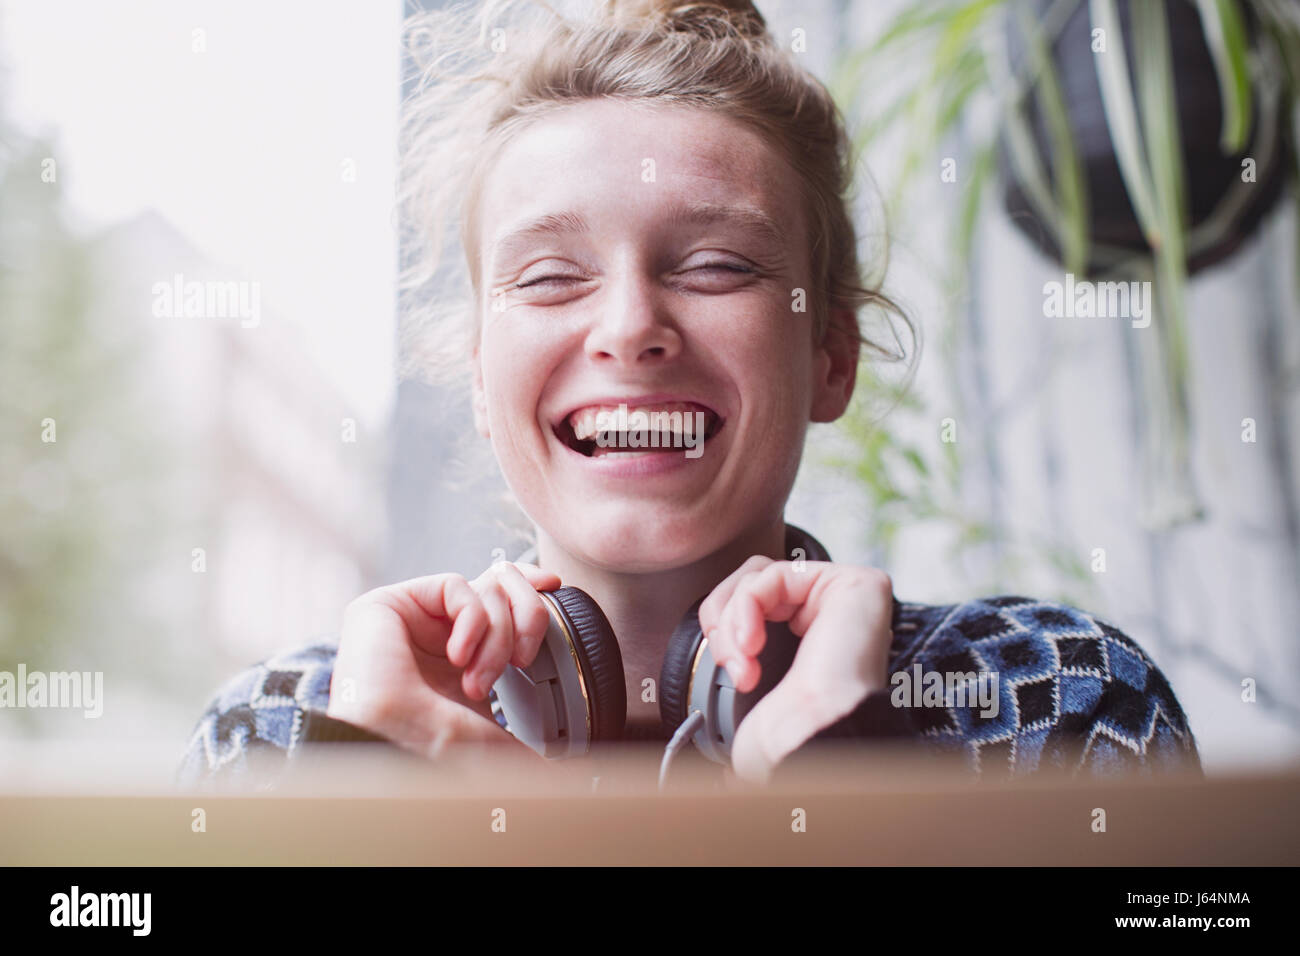 Portrait laughing young woman with headphones Stock Photo